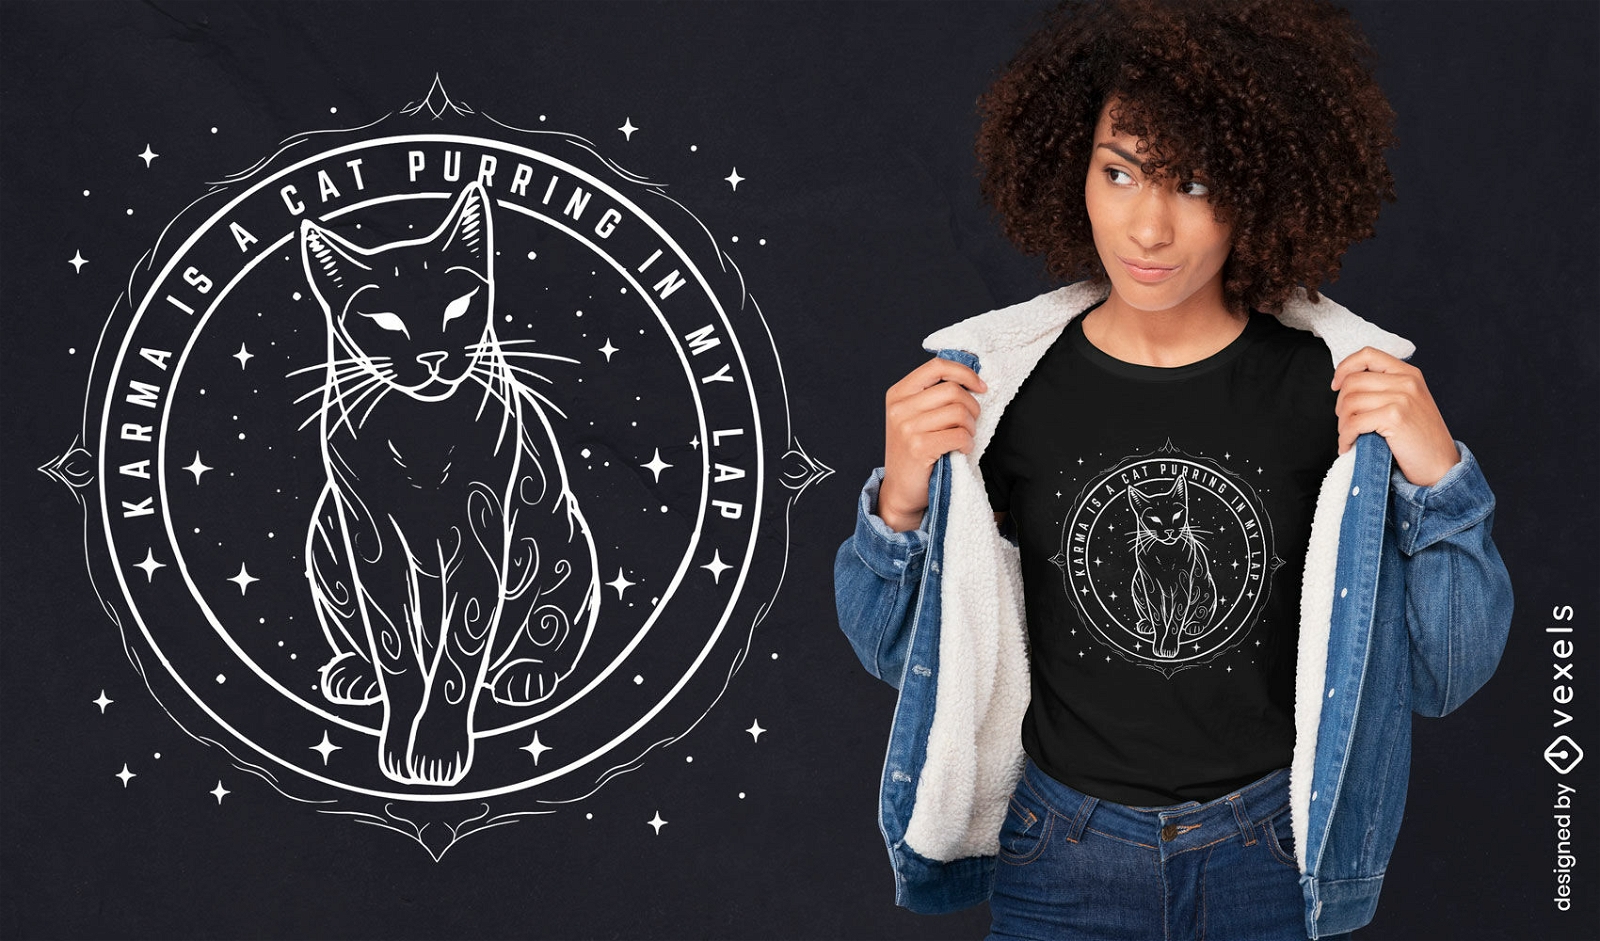 Astrology cat karma quote t-shirt design